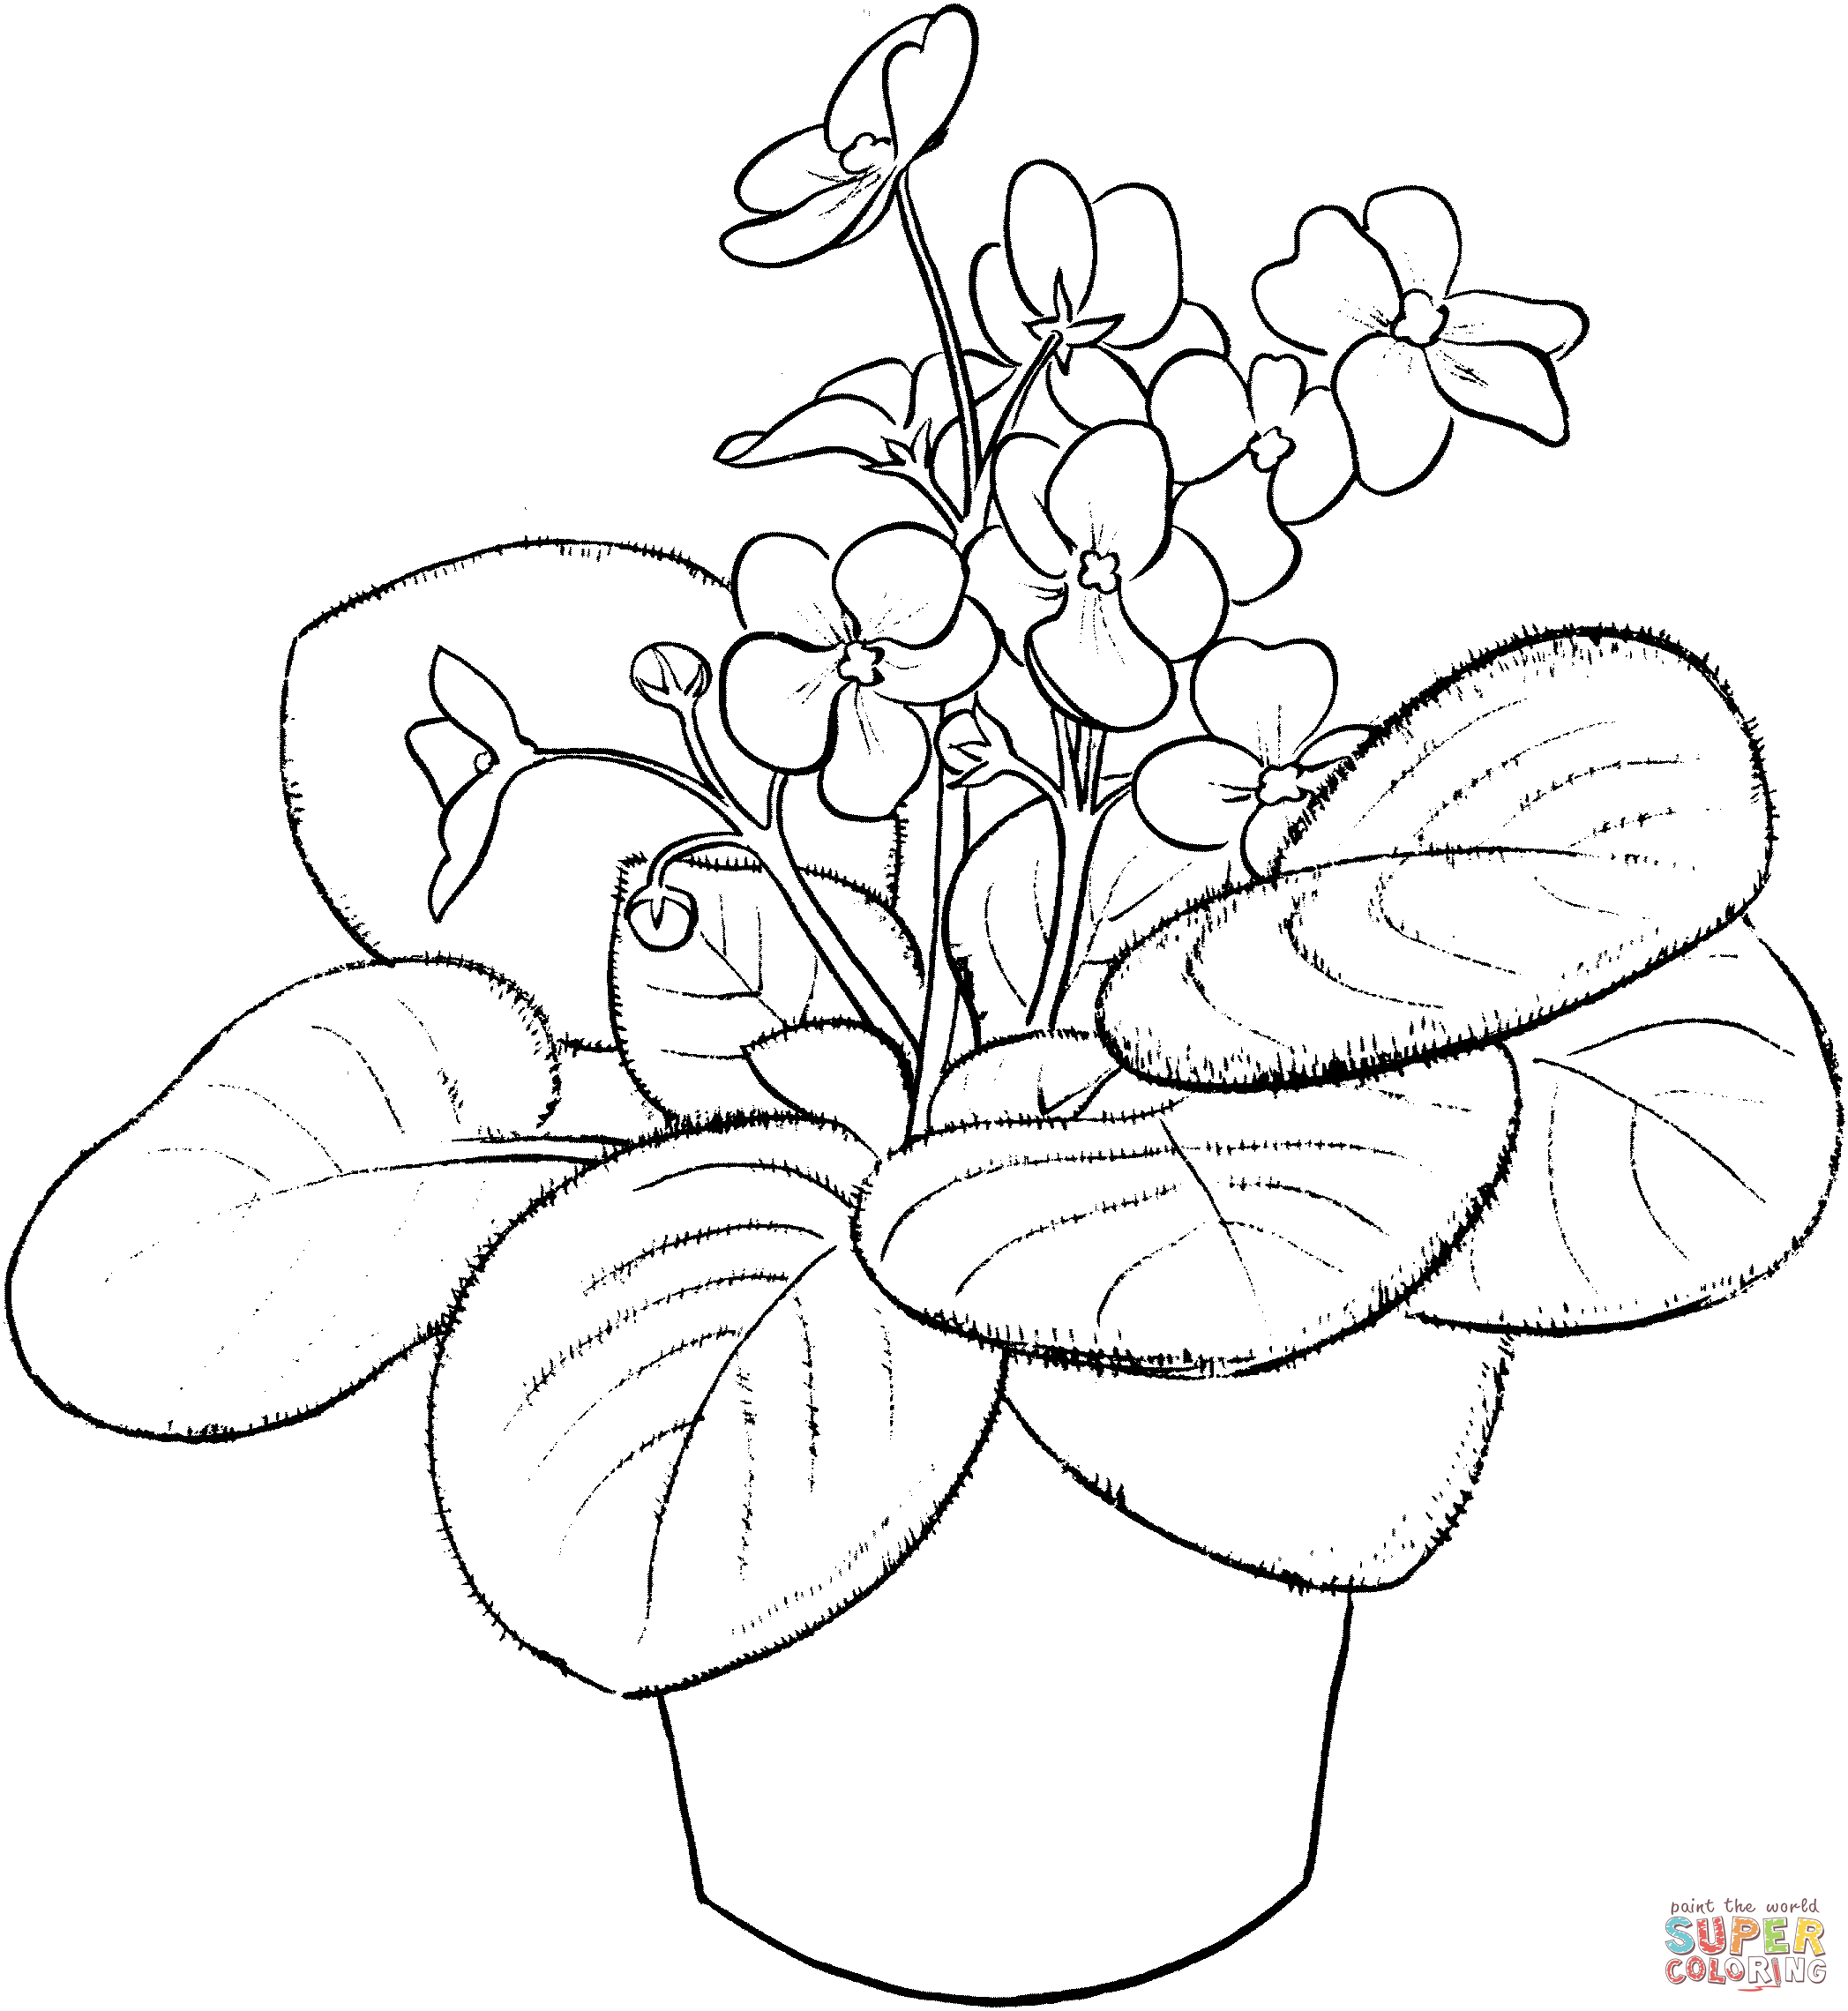 Saintpaulia ionantha or african violet coloring page free printable coloring pages